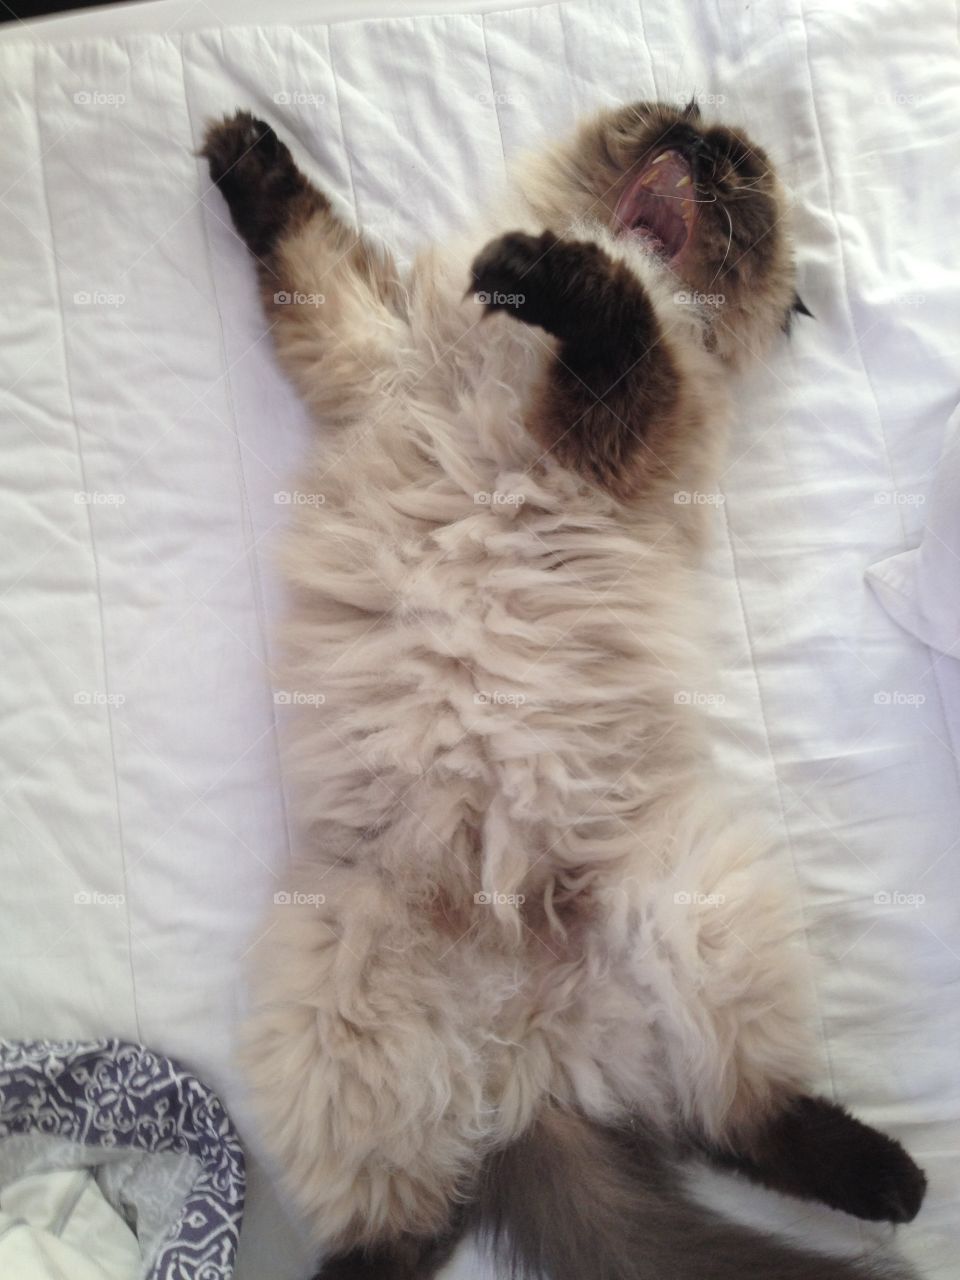 Blue eyed Himalayan cat stretching out on the bed yawning during another lazy day.